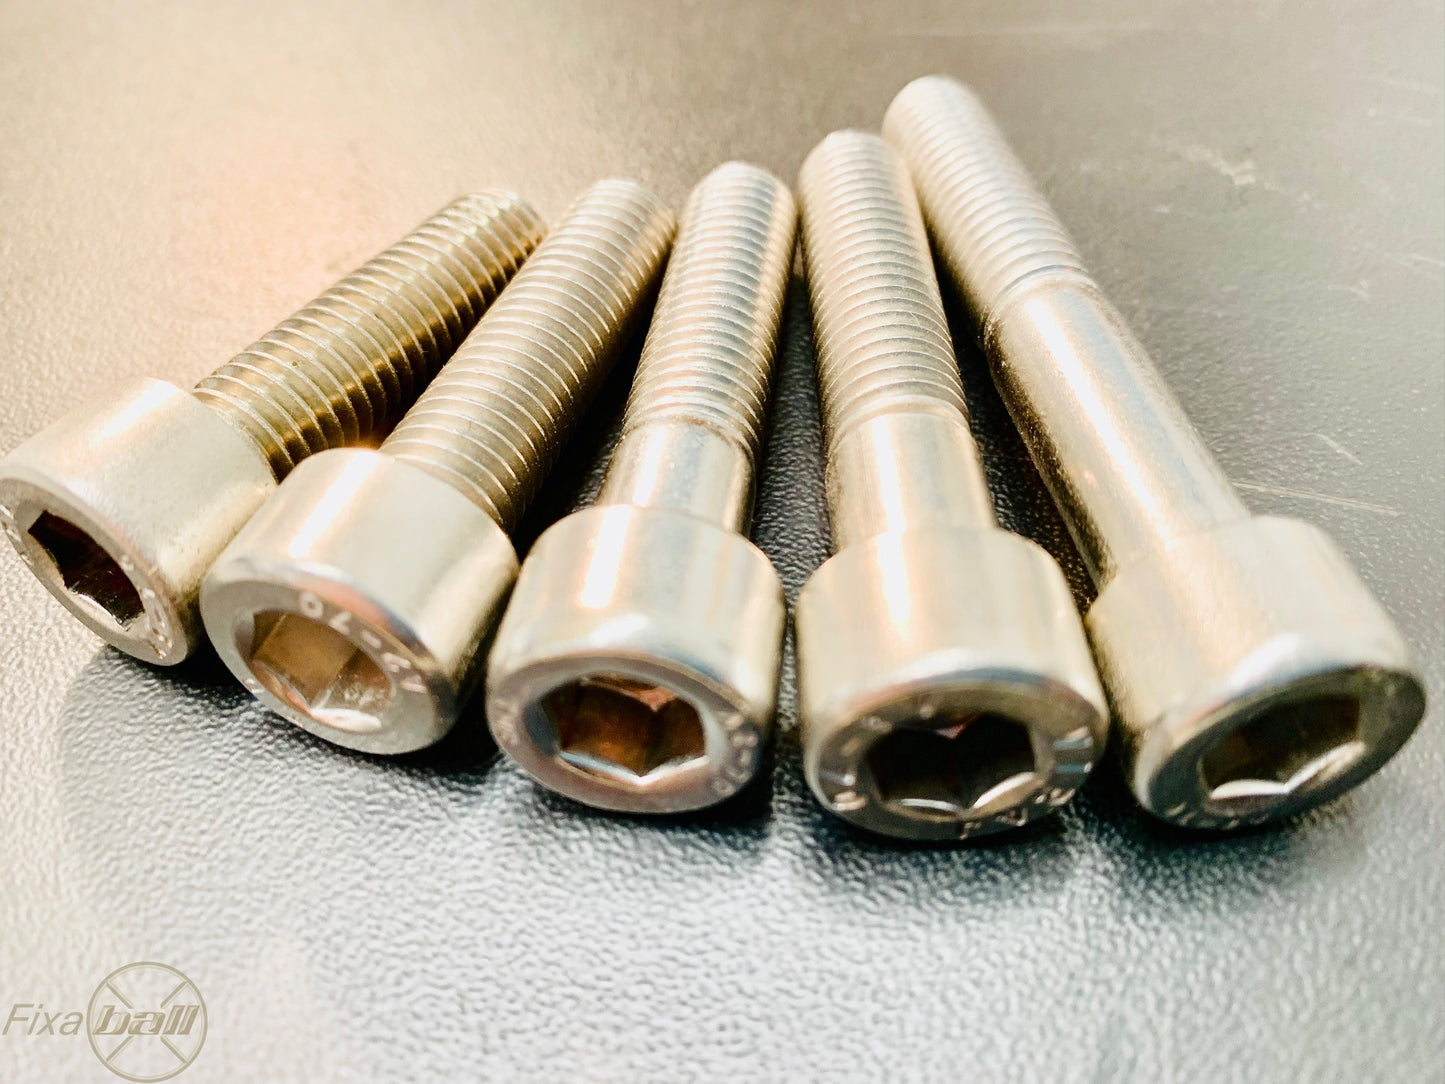 M8 x Over 50mm, Socket Cap Screw, A2/ 304 Stainless Steel, DIN 912. Socket Screw, Cap Head M8 x Over 50mm, Socket Cap Screw, A2/ 304 Stainless Steel, DIN 912. METRIC - Cap Head